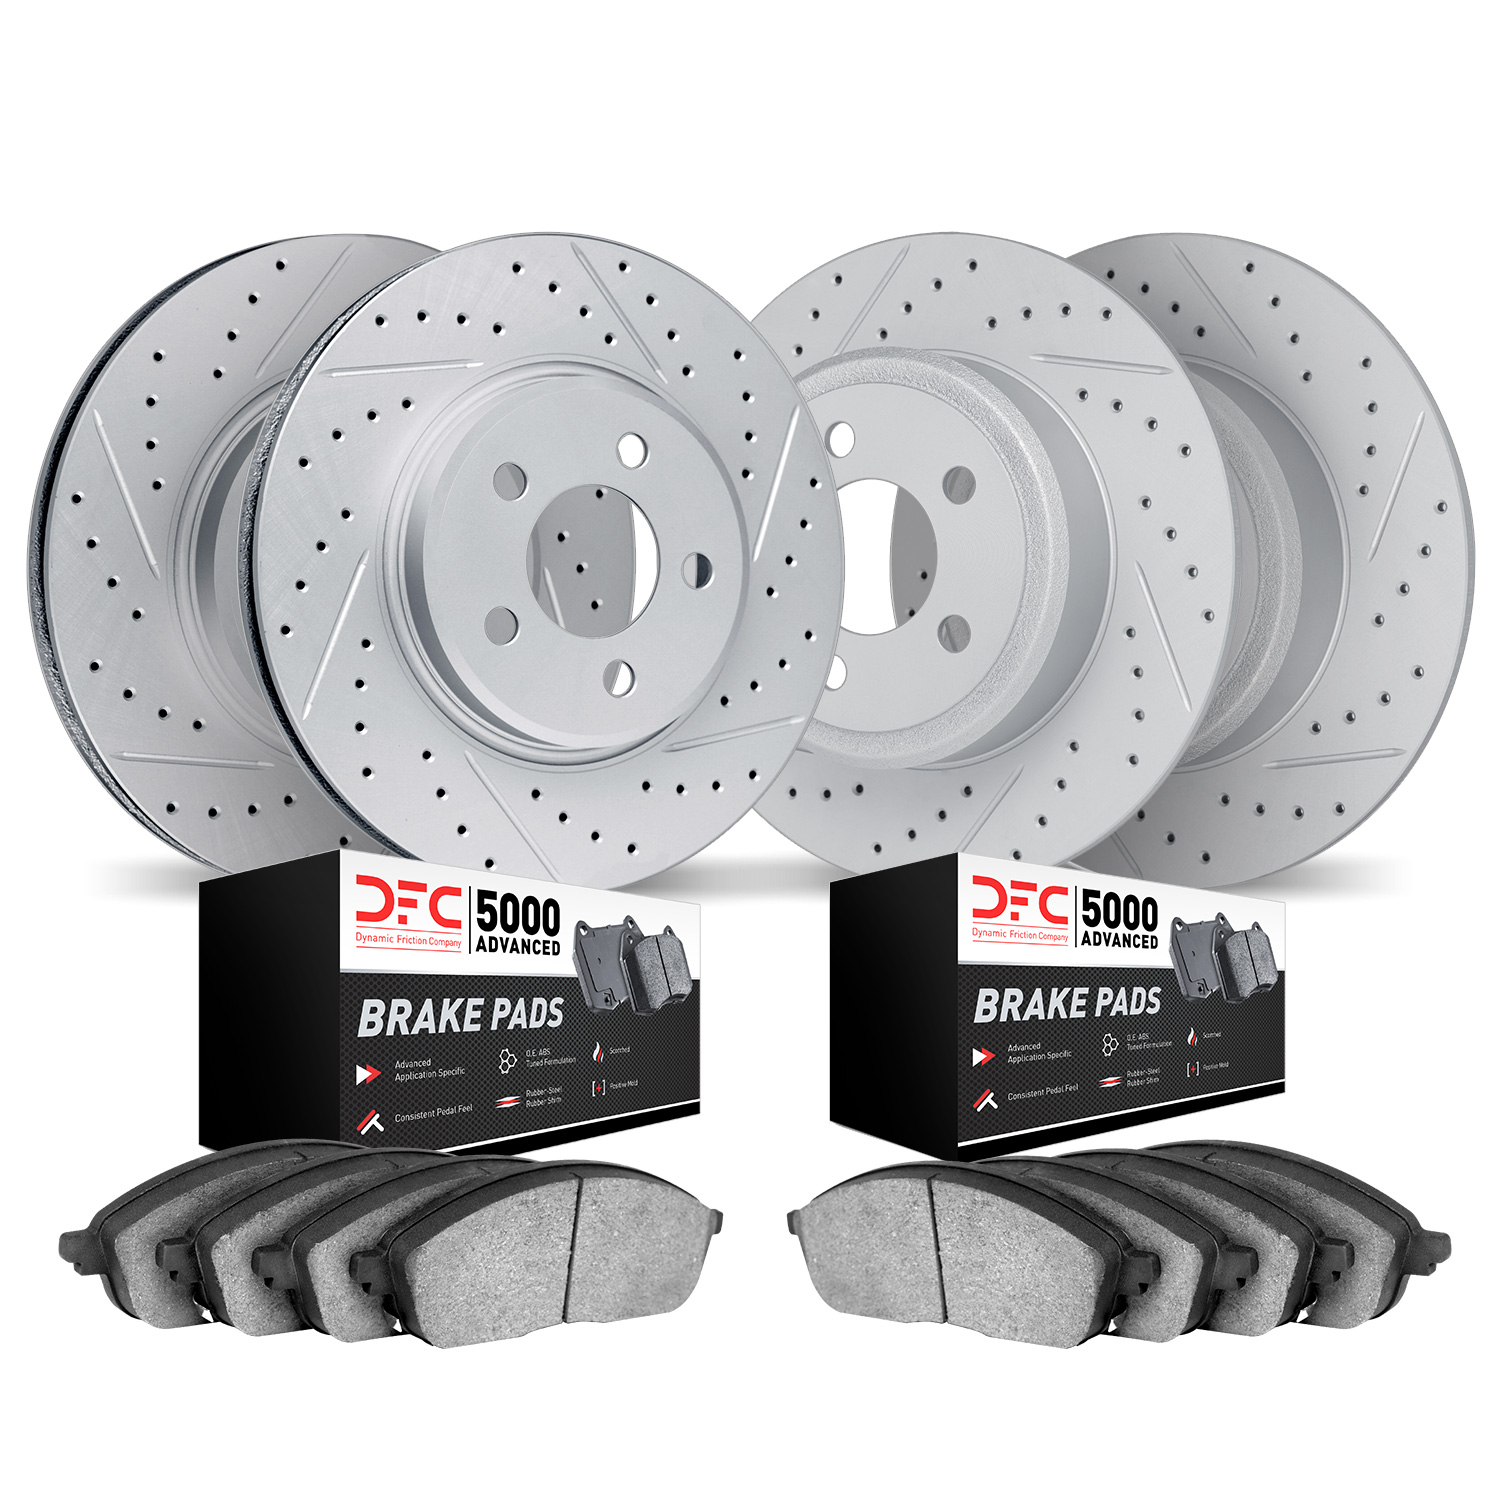 2504-59086 Geoperformance Drilled/Slotted Rotors w/5000 Advanced Brake Pads Kit, 2017-2019 Acura/Honda, Position: Front and Rear